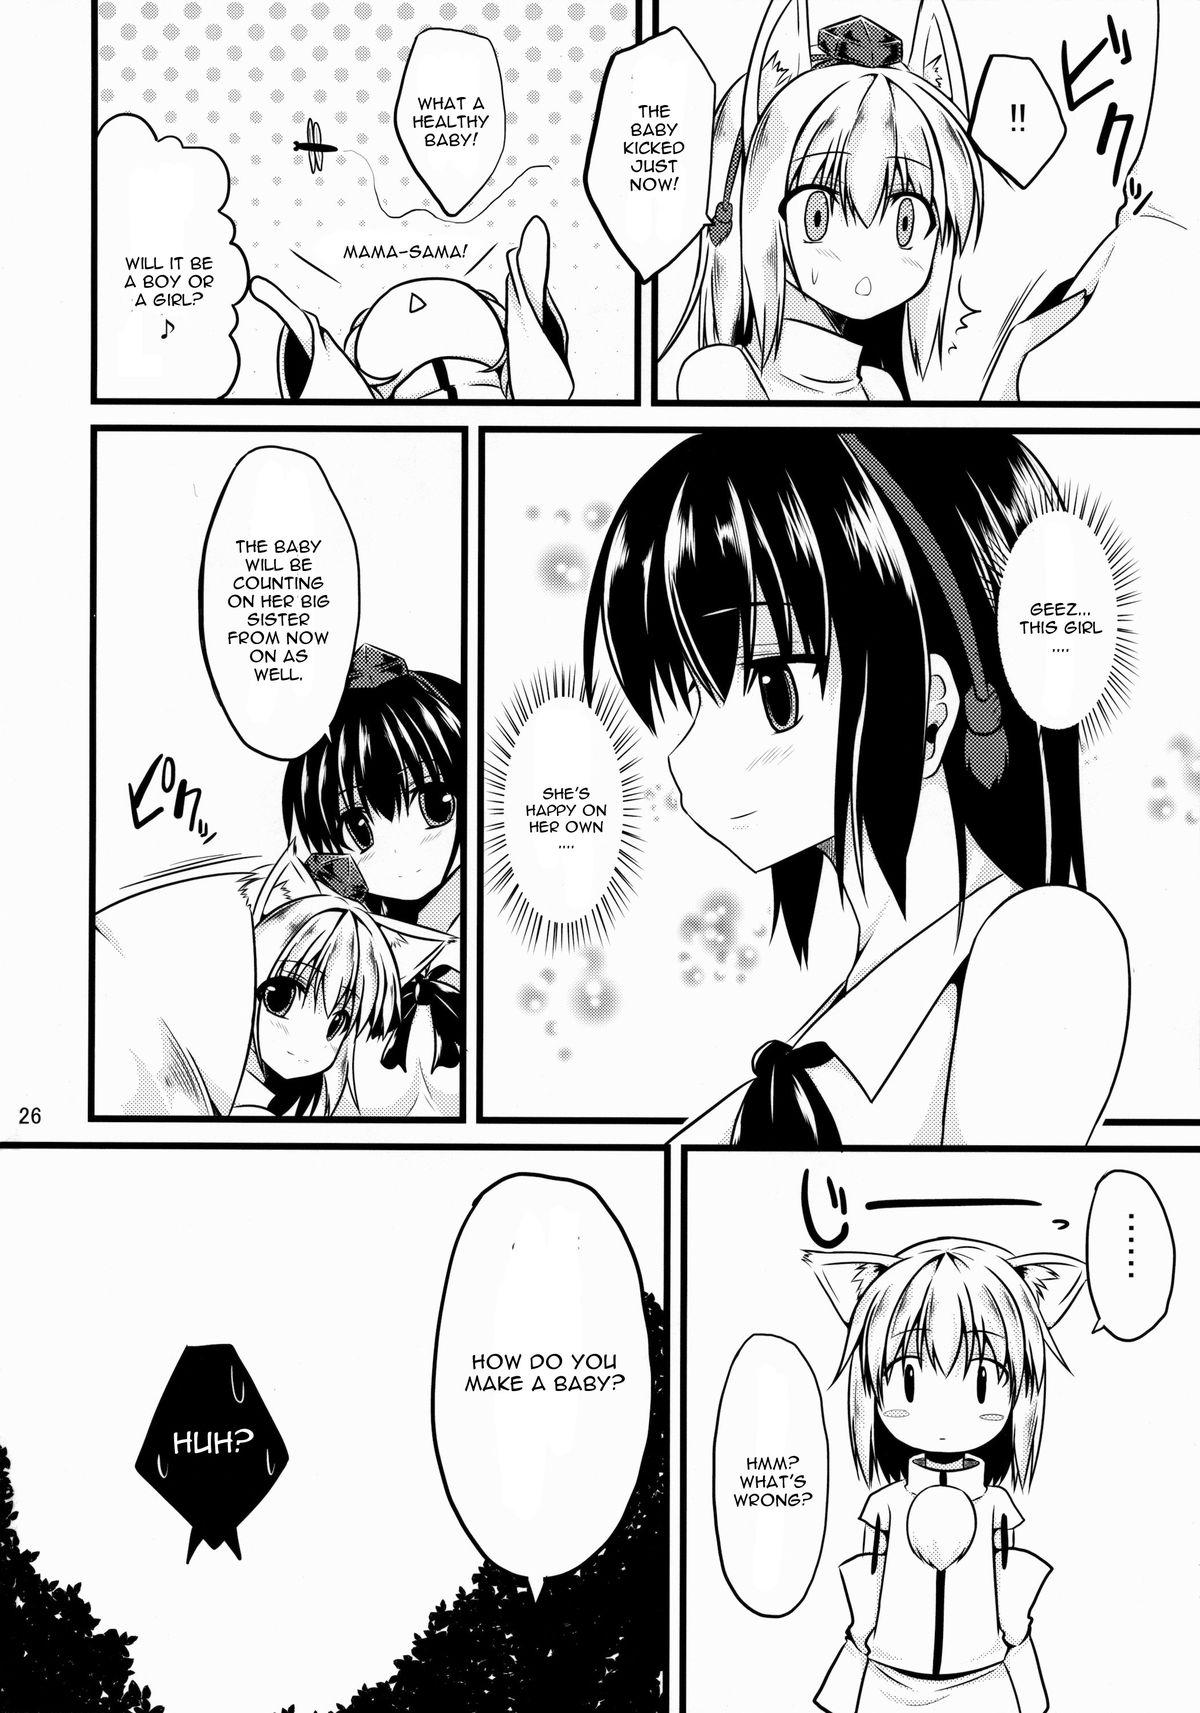 Flaquita Aidane 9 | Love Seed 9 - Touhou project Oral Porn - Page 26